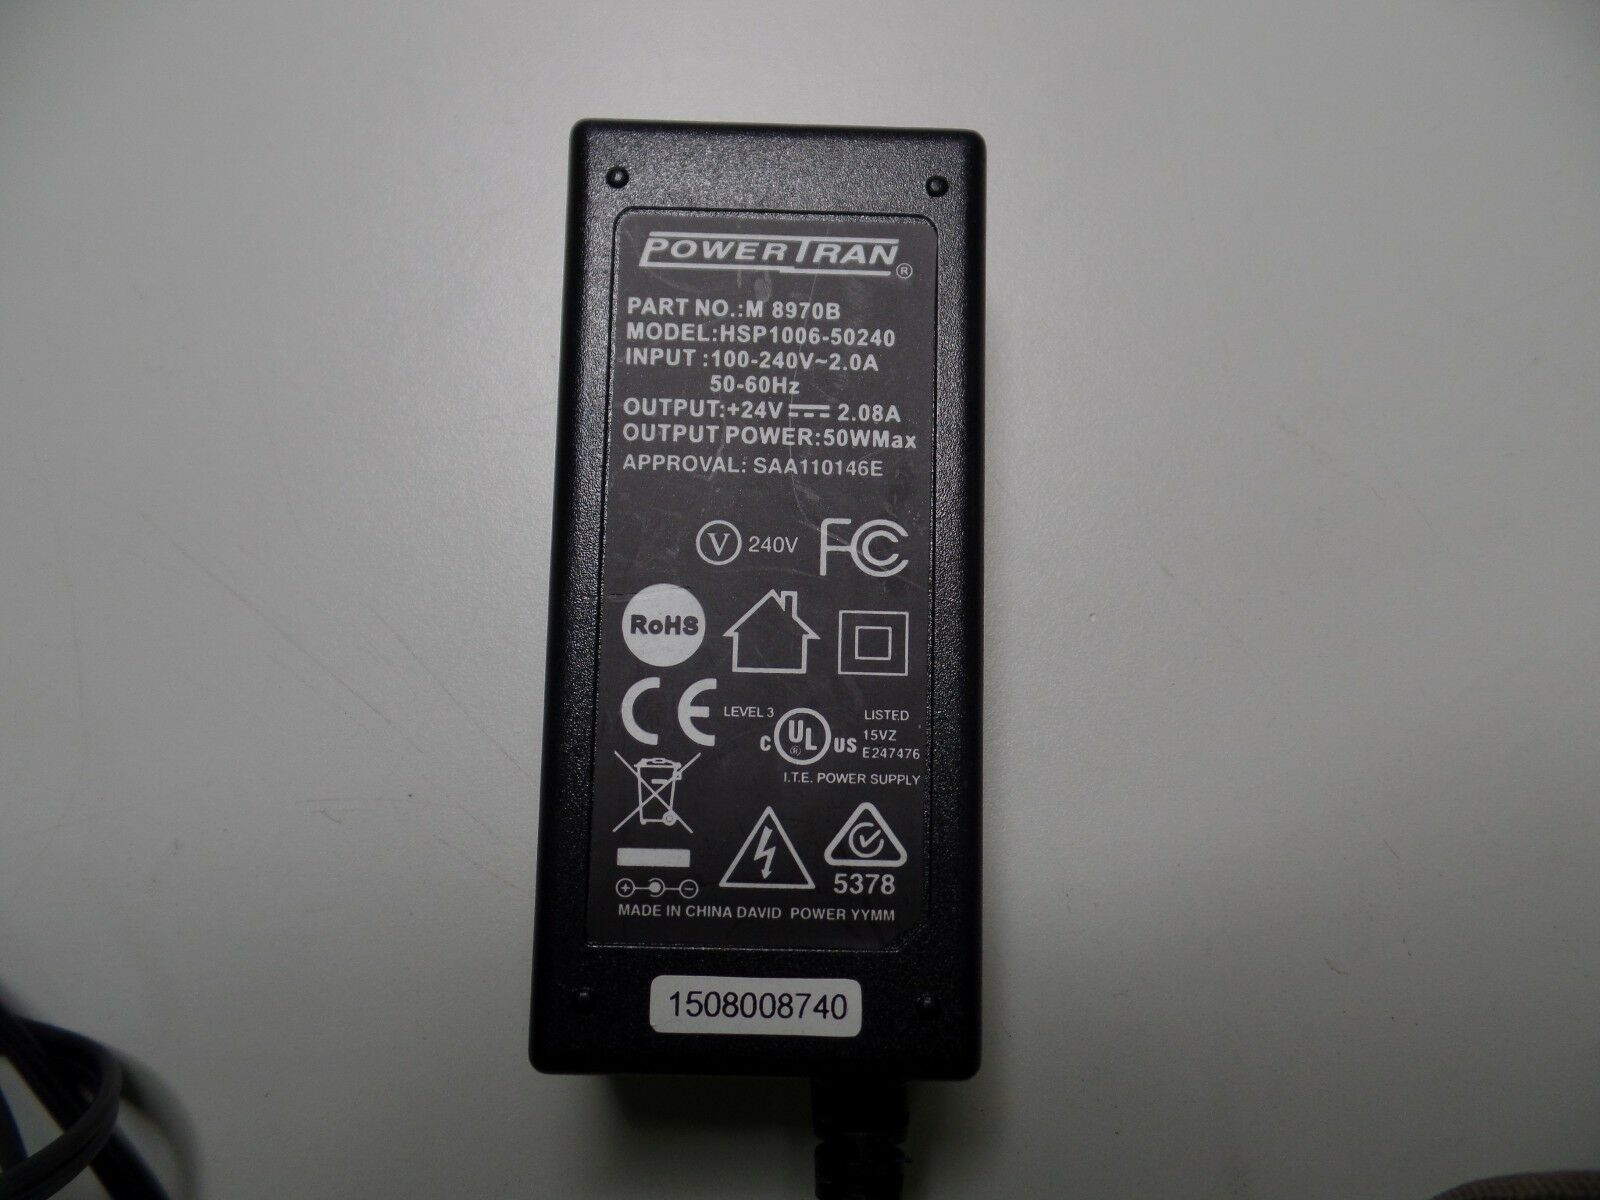 Powertran M 8970B HSP1006-50240 24V 2.08A AC Adapter 2.1mm DCJack for Appliances Specification: Manufacturer: PowerTra - Click Image to Close